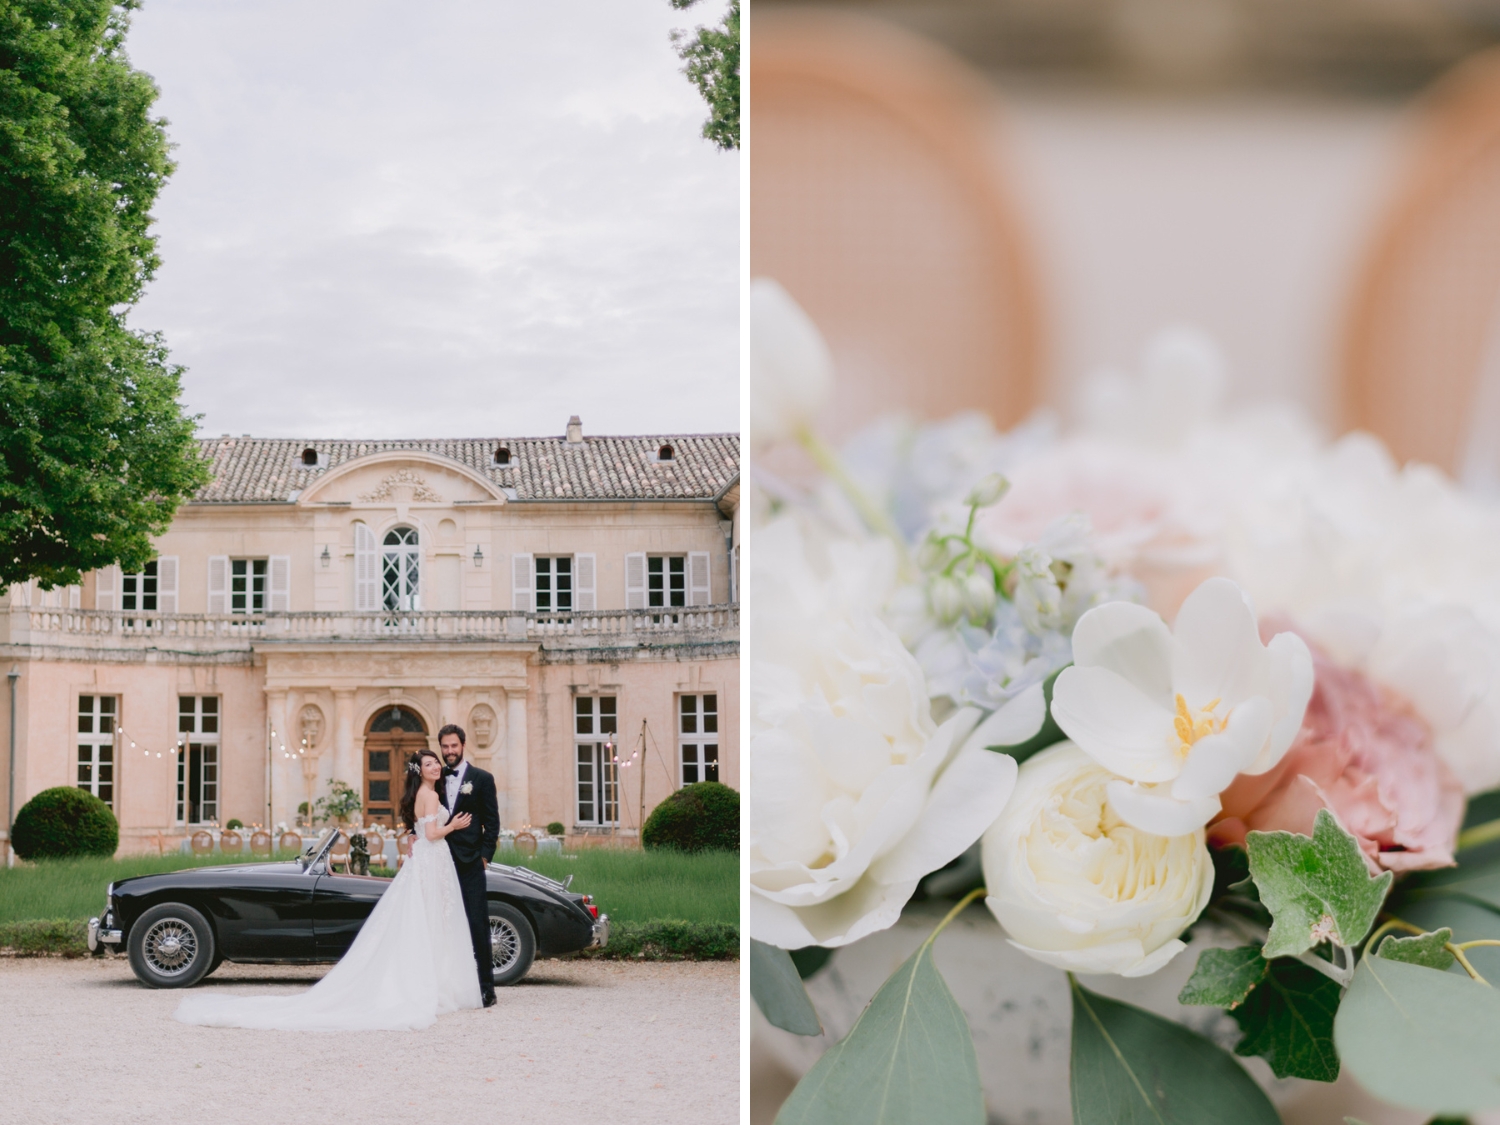 Decoration at a Spring Wedding at Chateau Martinay in Provence, France